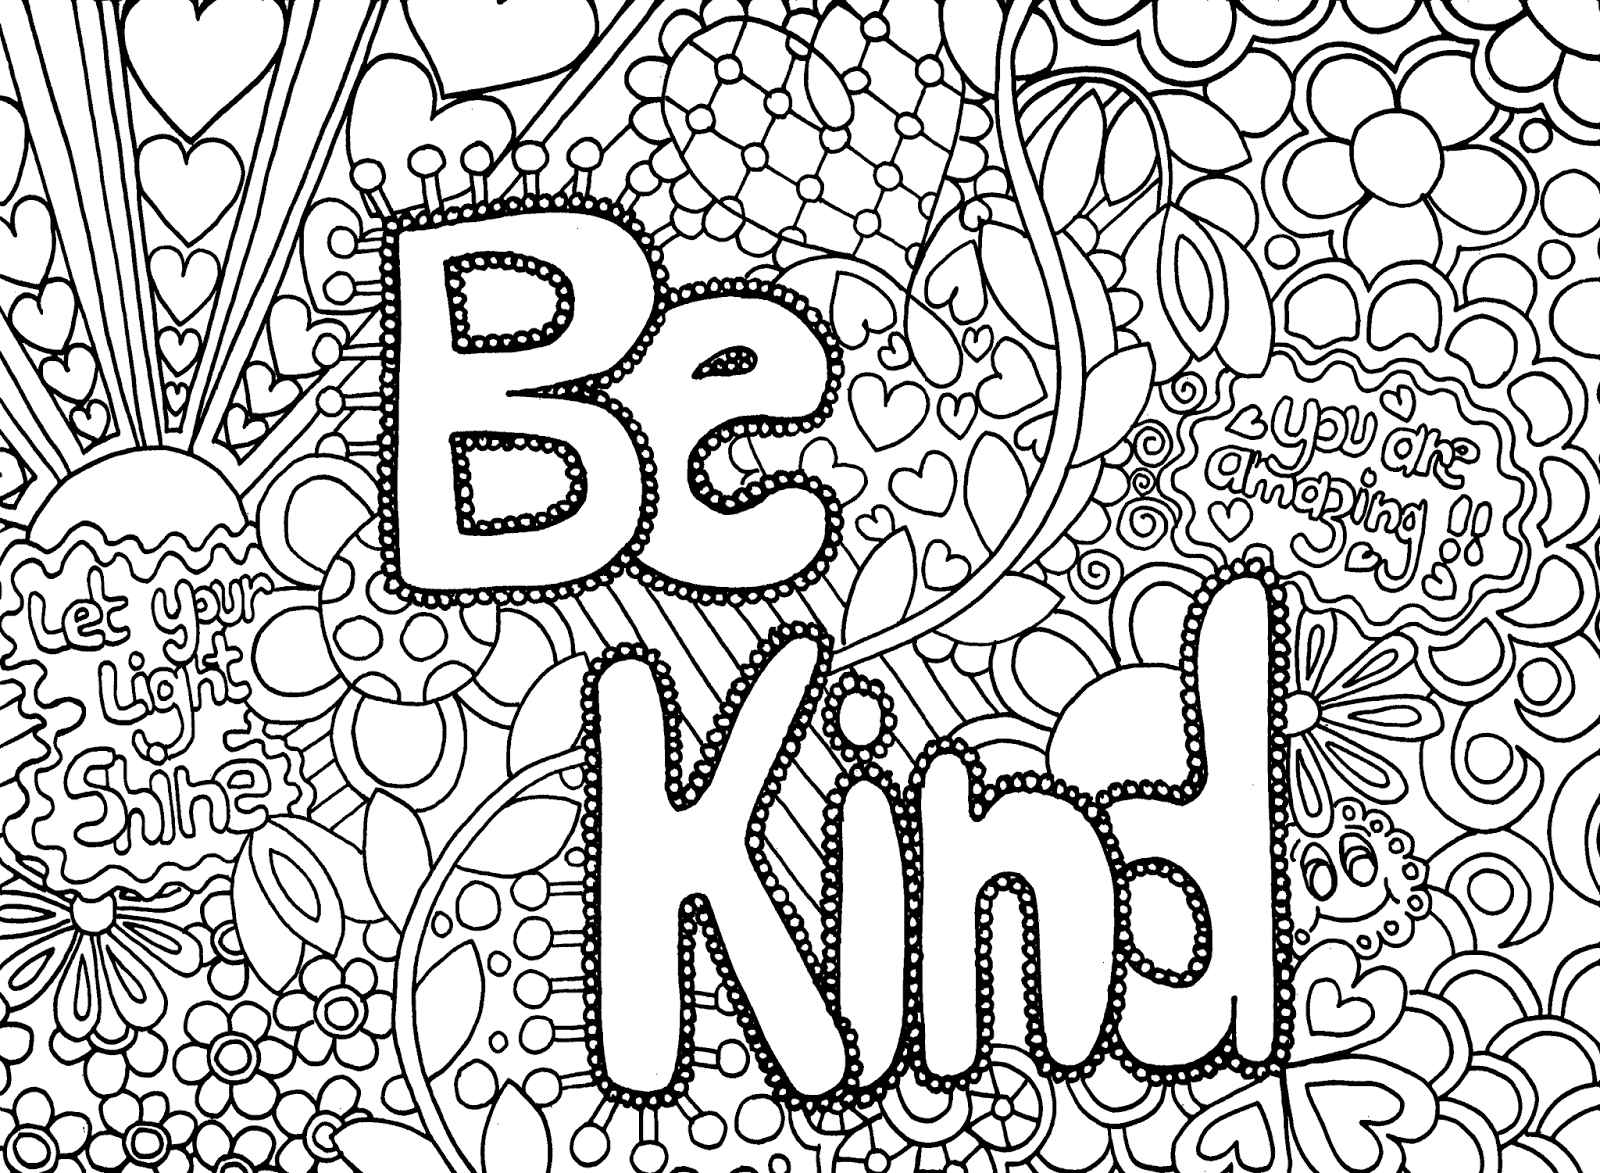 Free Coloring Pages For Adults Printable Hard To Color | Printable - Free Printable Hard Coloring Pages For Adults